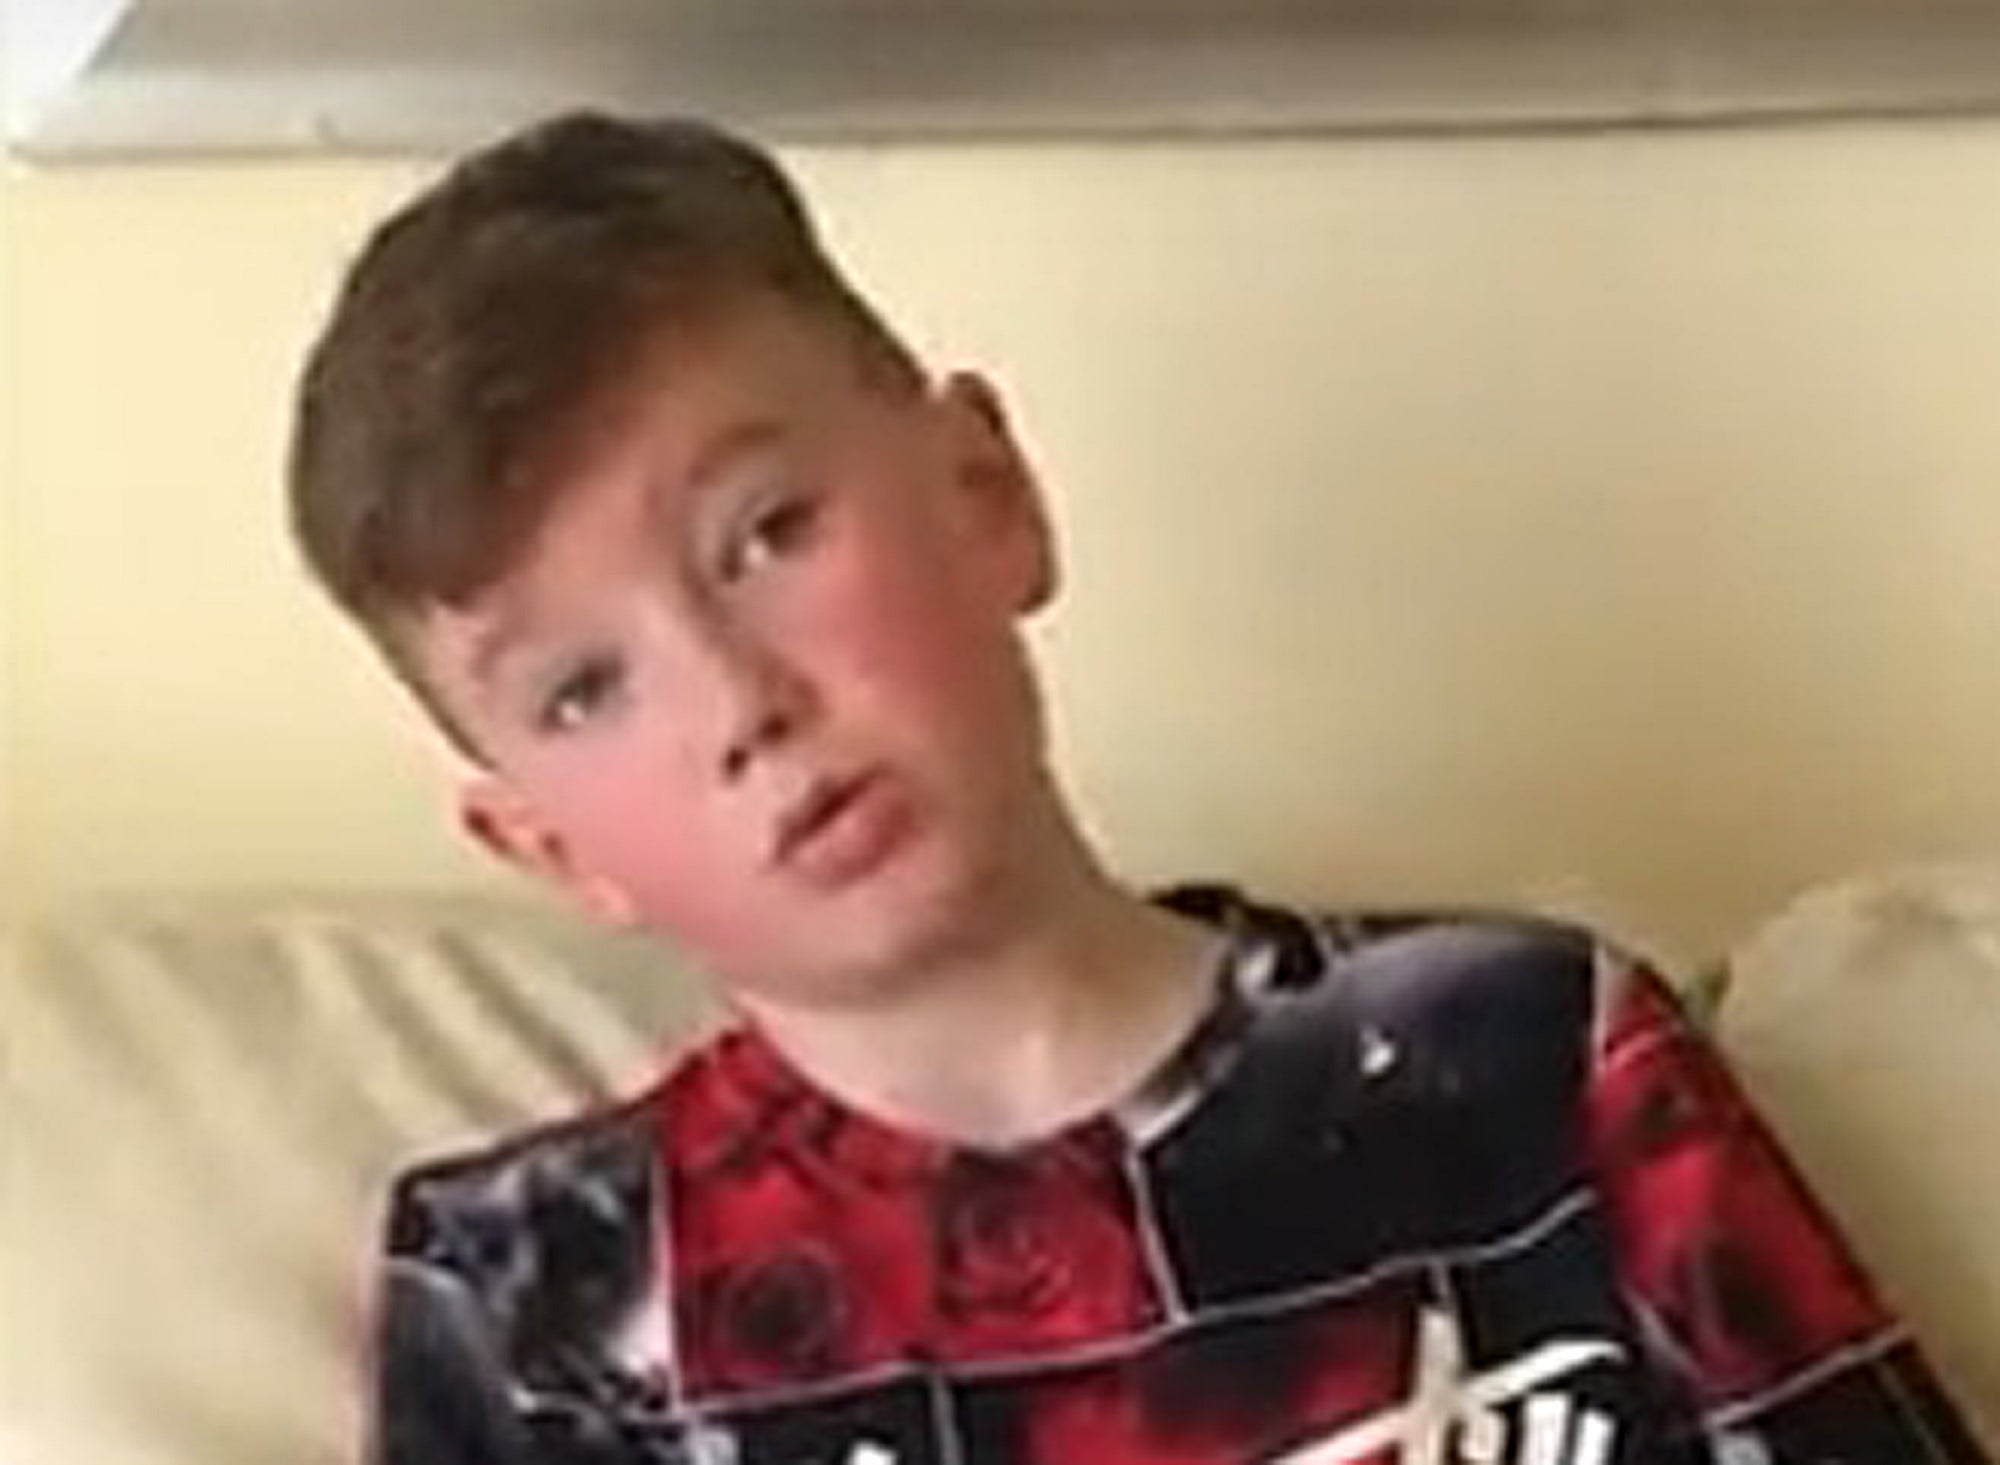 Alex Batty went missing with his mother and grandfather when he was aged 11